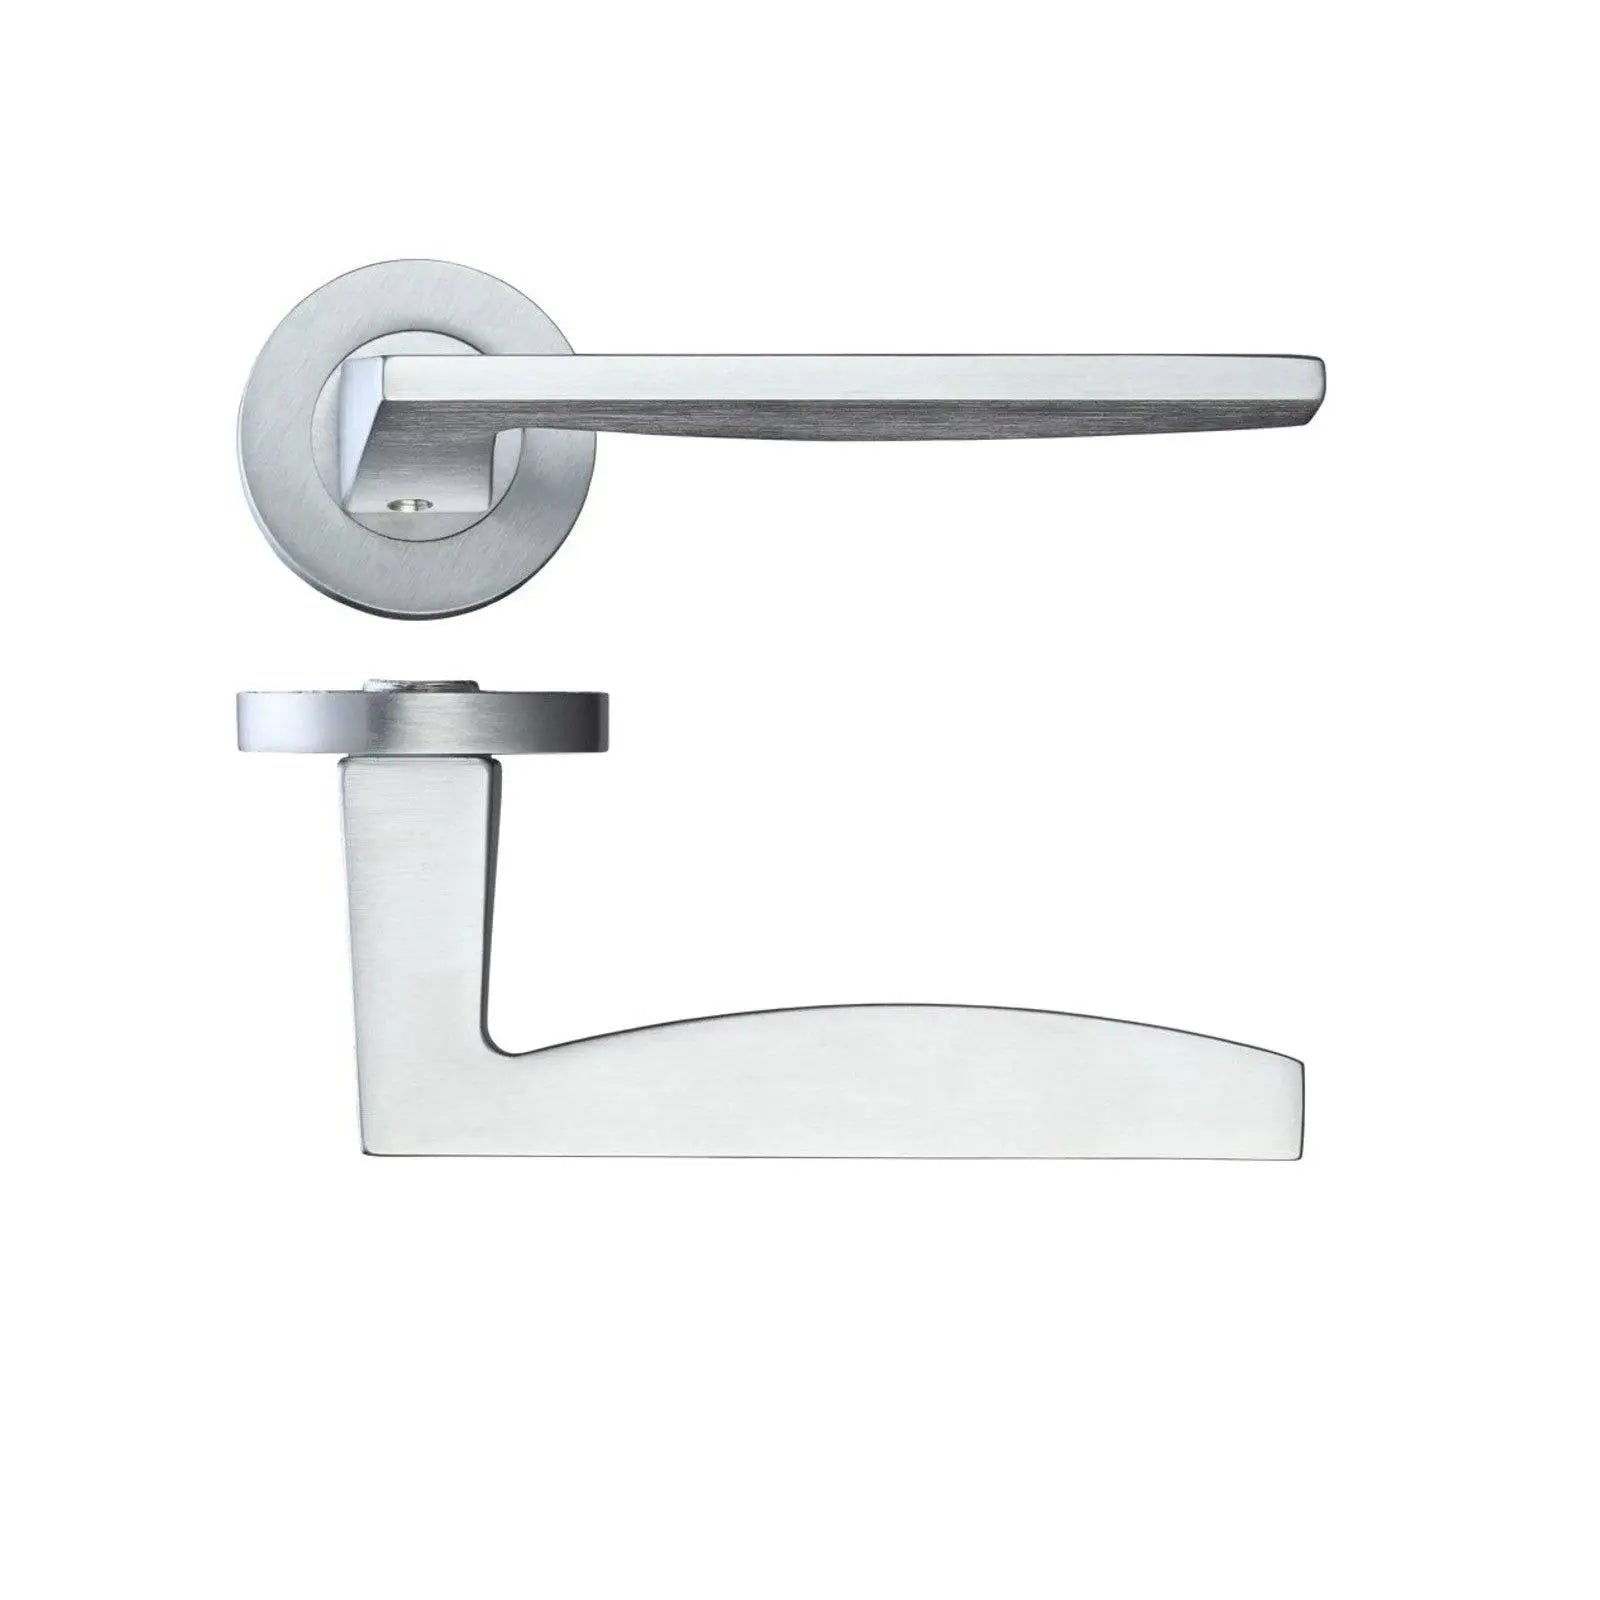 Satin Chrome Door Handle Lever On Rose - Decor And Decor